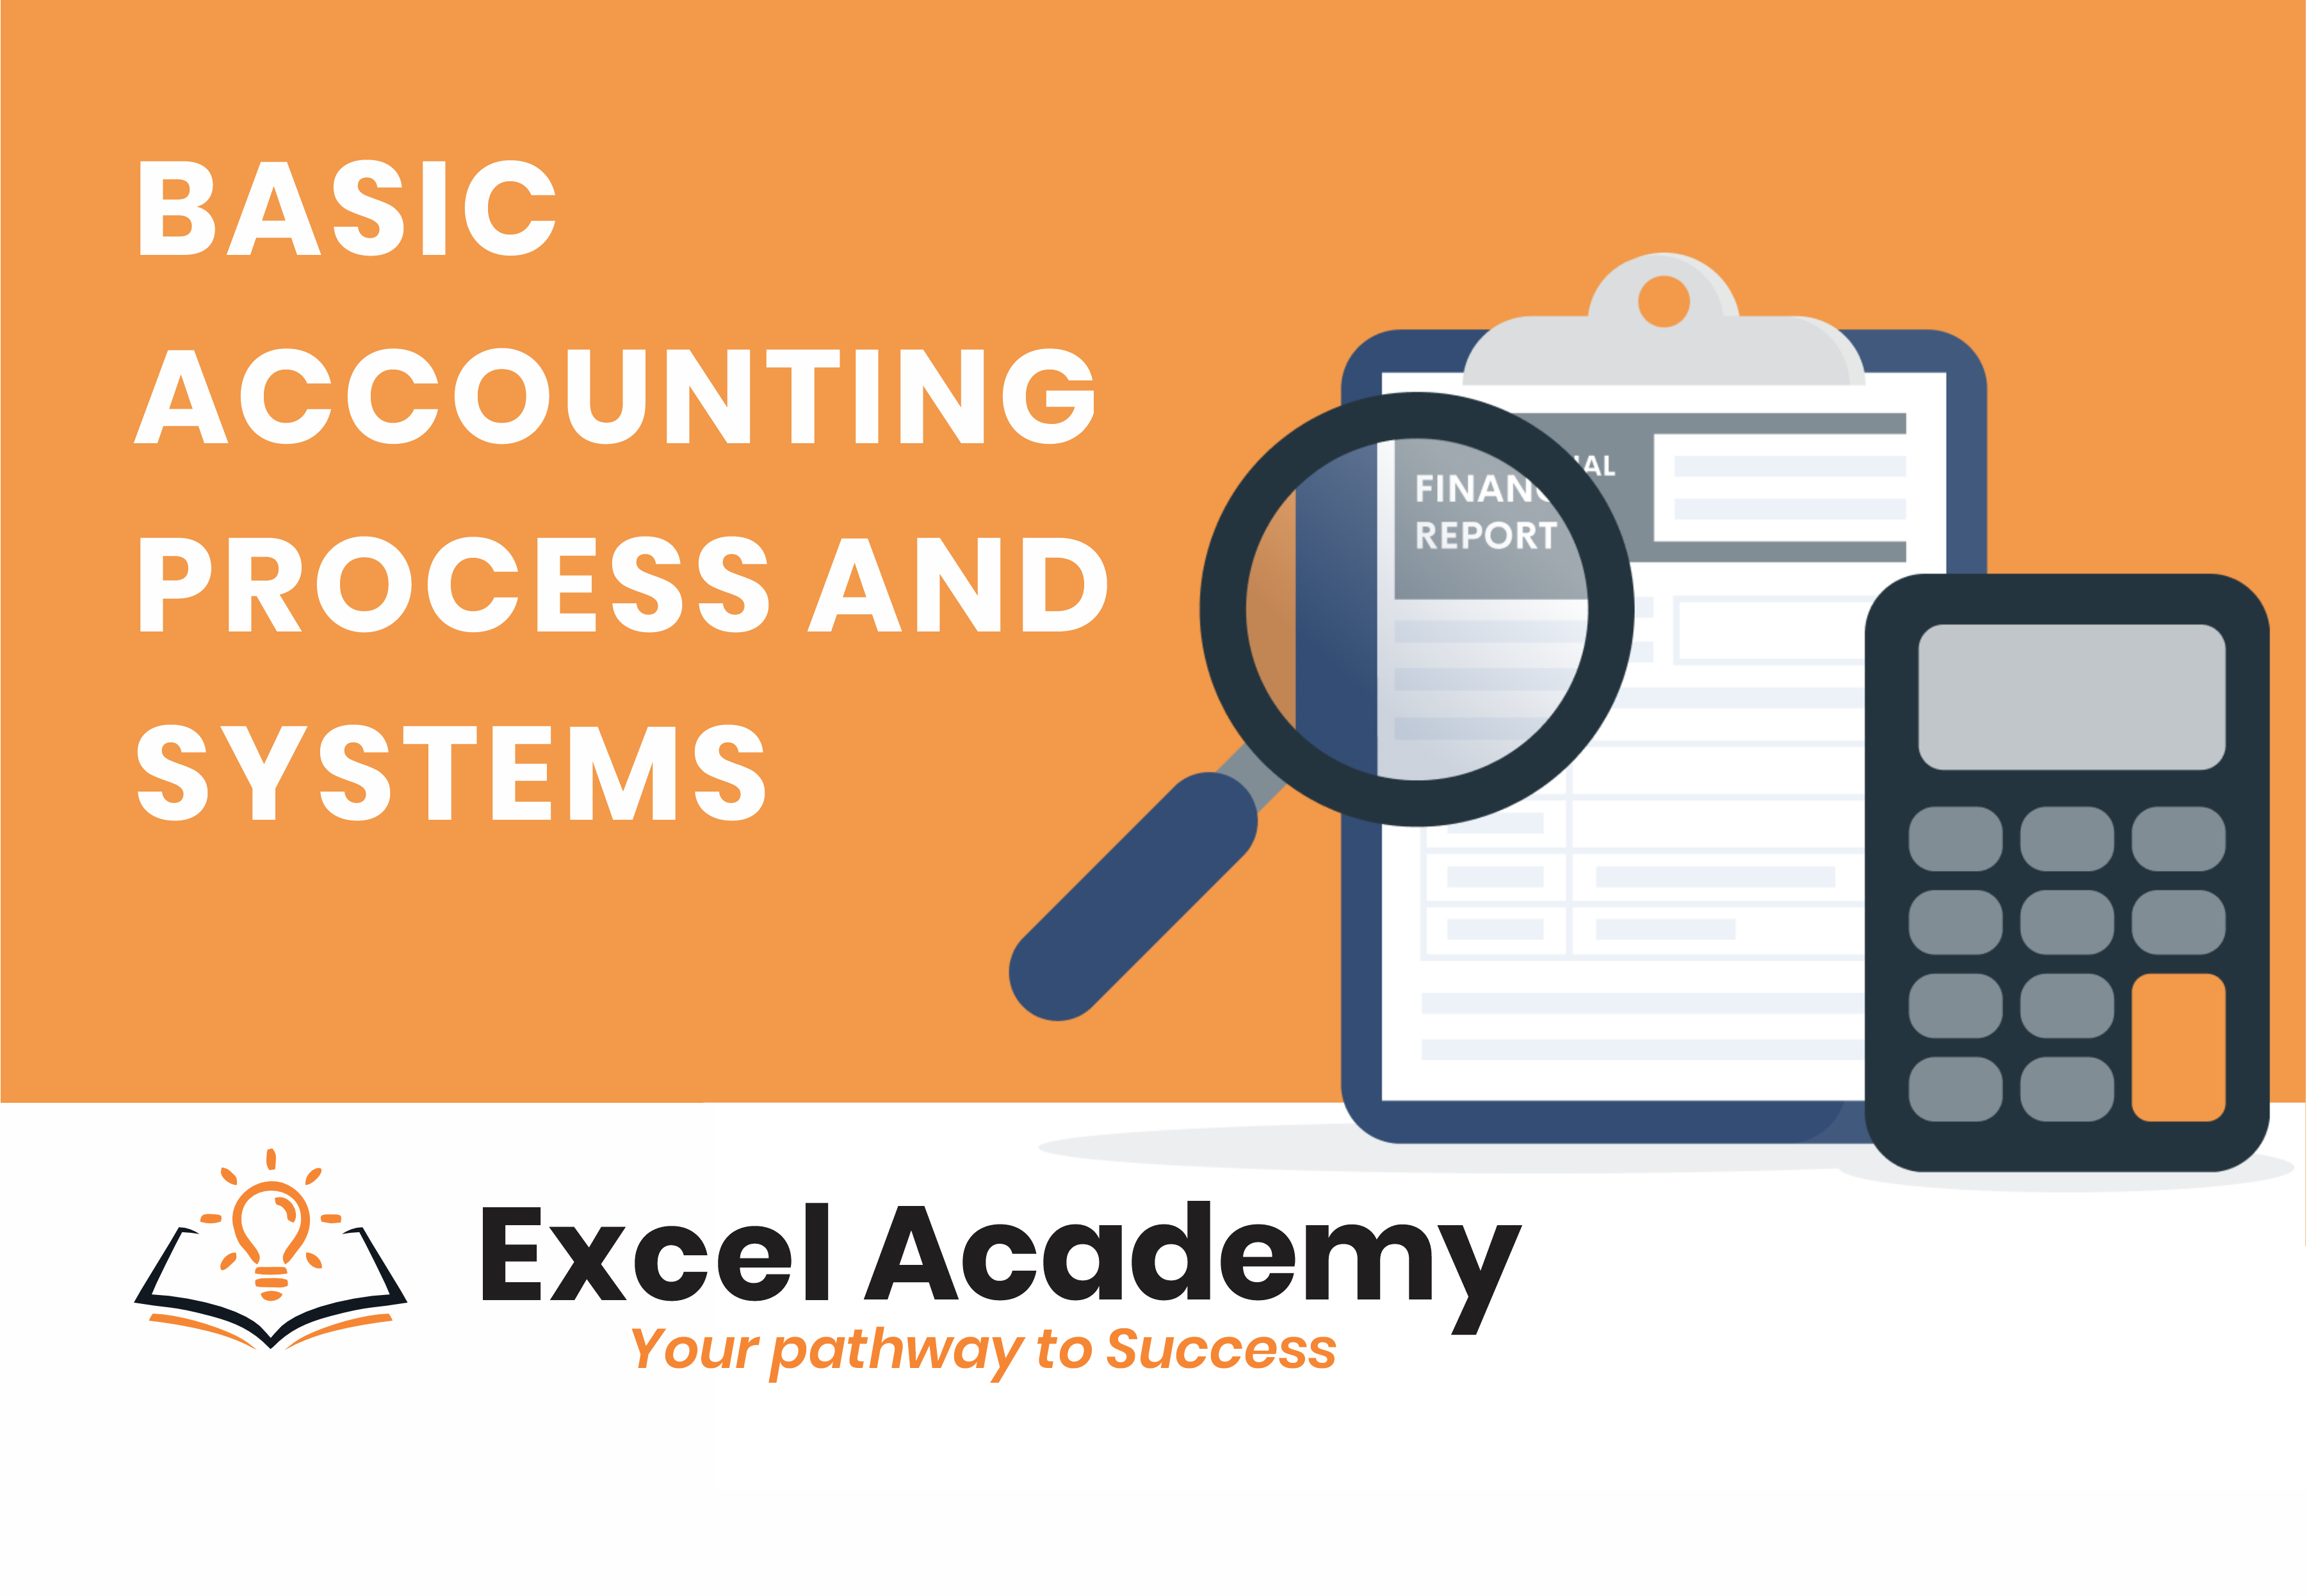 Basic Accounting Process & Systems